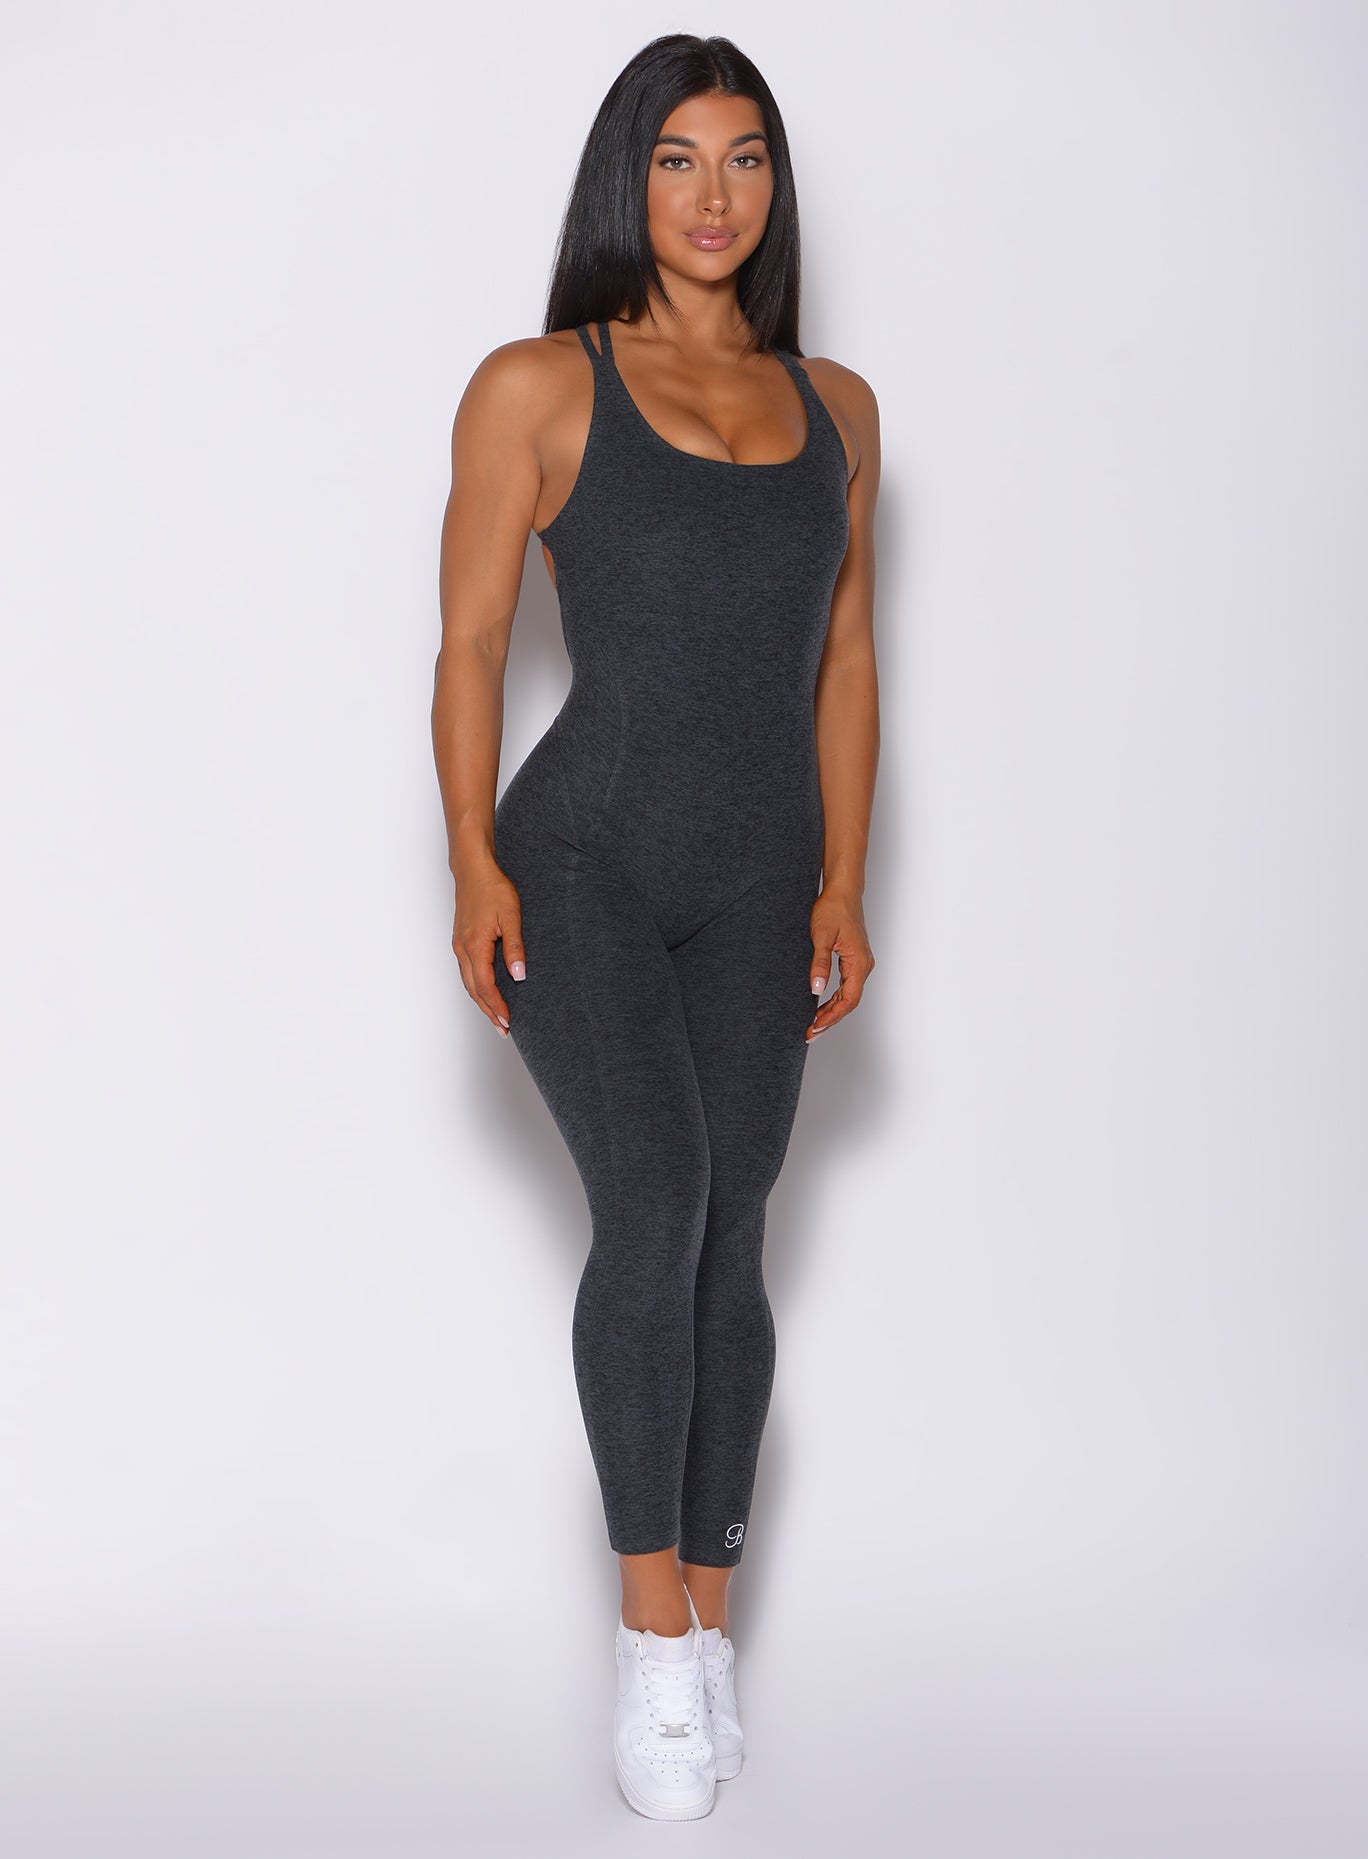 Model facing forward wearing our form bodysuit in charcoal color